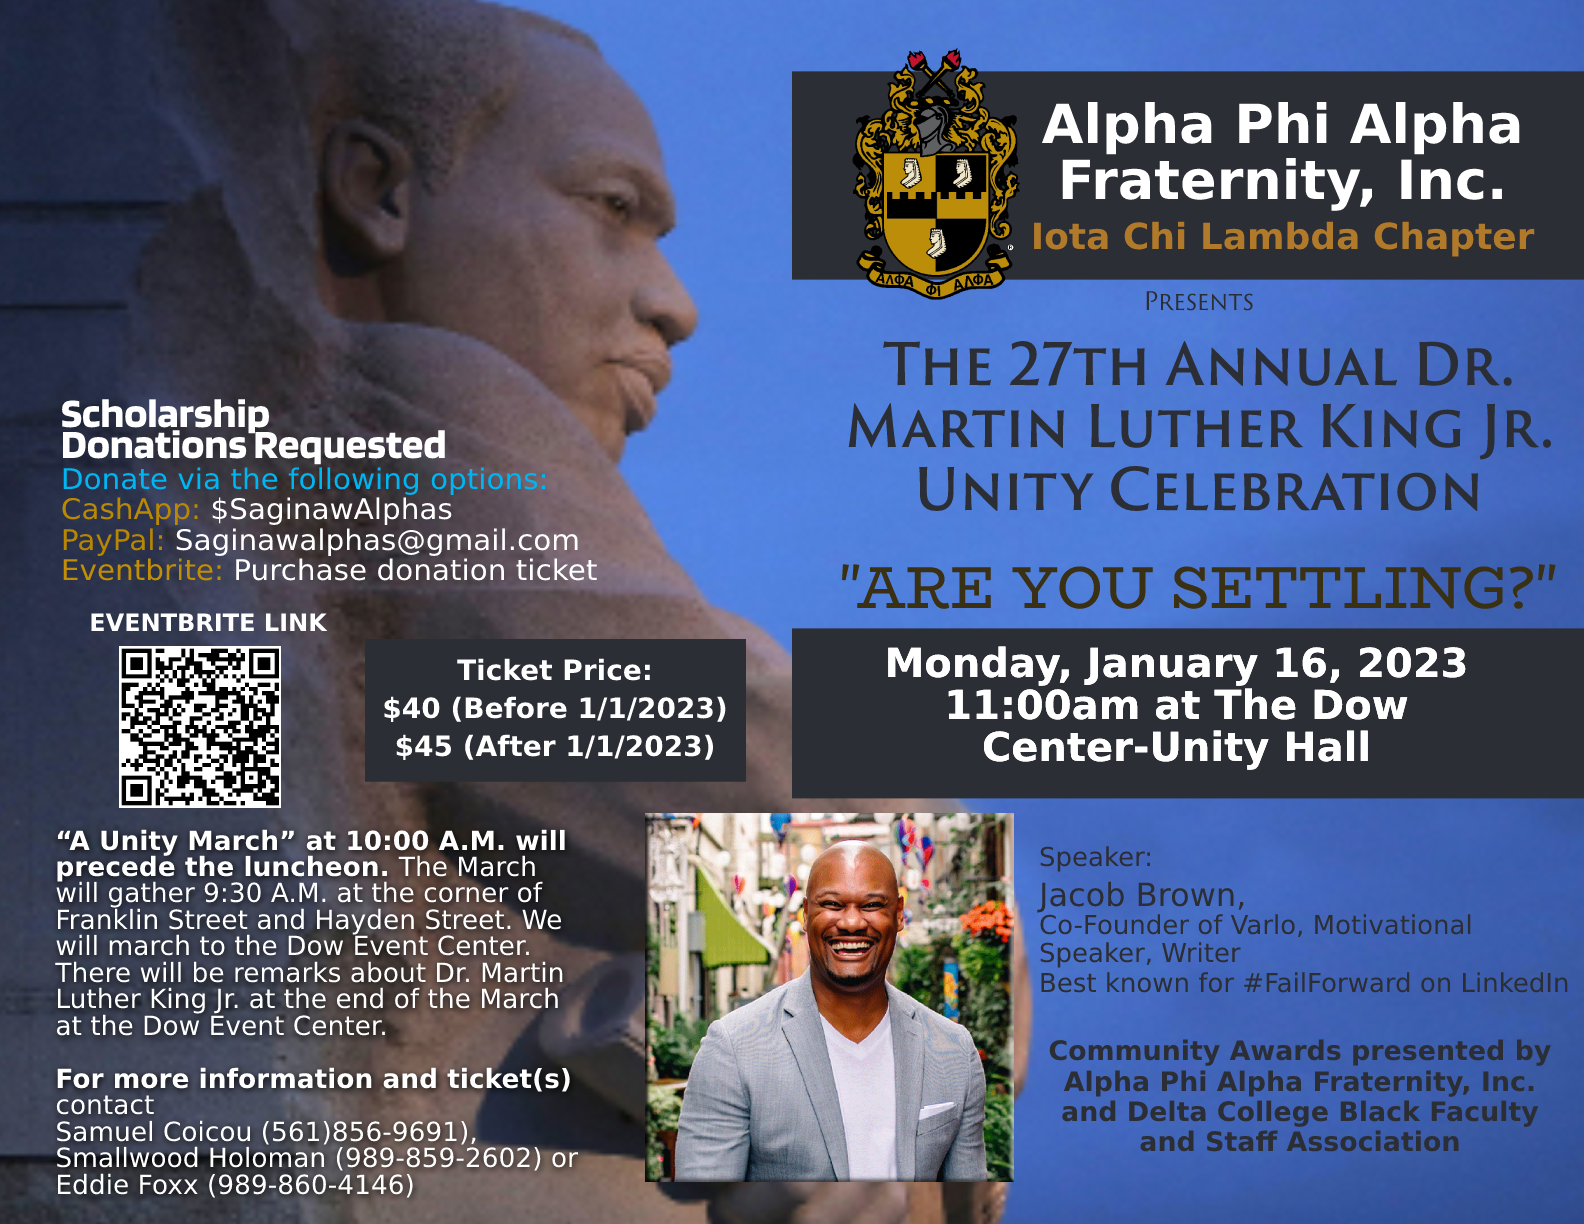 <h1 class="tribe-events-single-event-title">The 27th Annual Dr. Martin Luther King Jr. Unity Celebration “Are You Settling?”</h1>